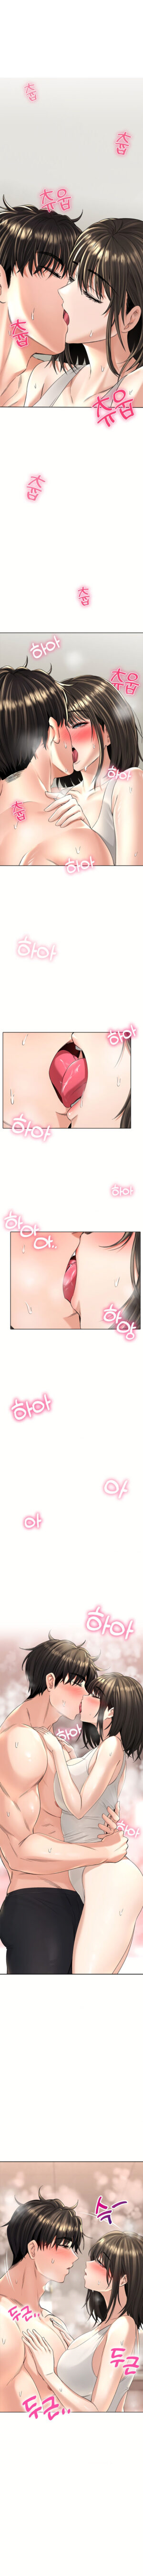 [Lee Juwon] Herbal Love Story (1-20.5) [English] [Omega Scans] [Ongoing]